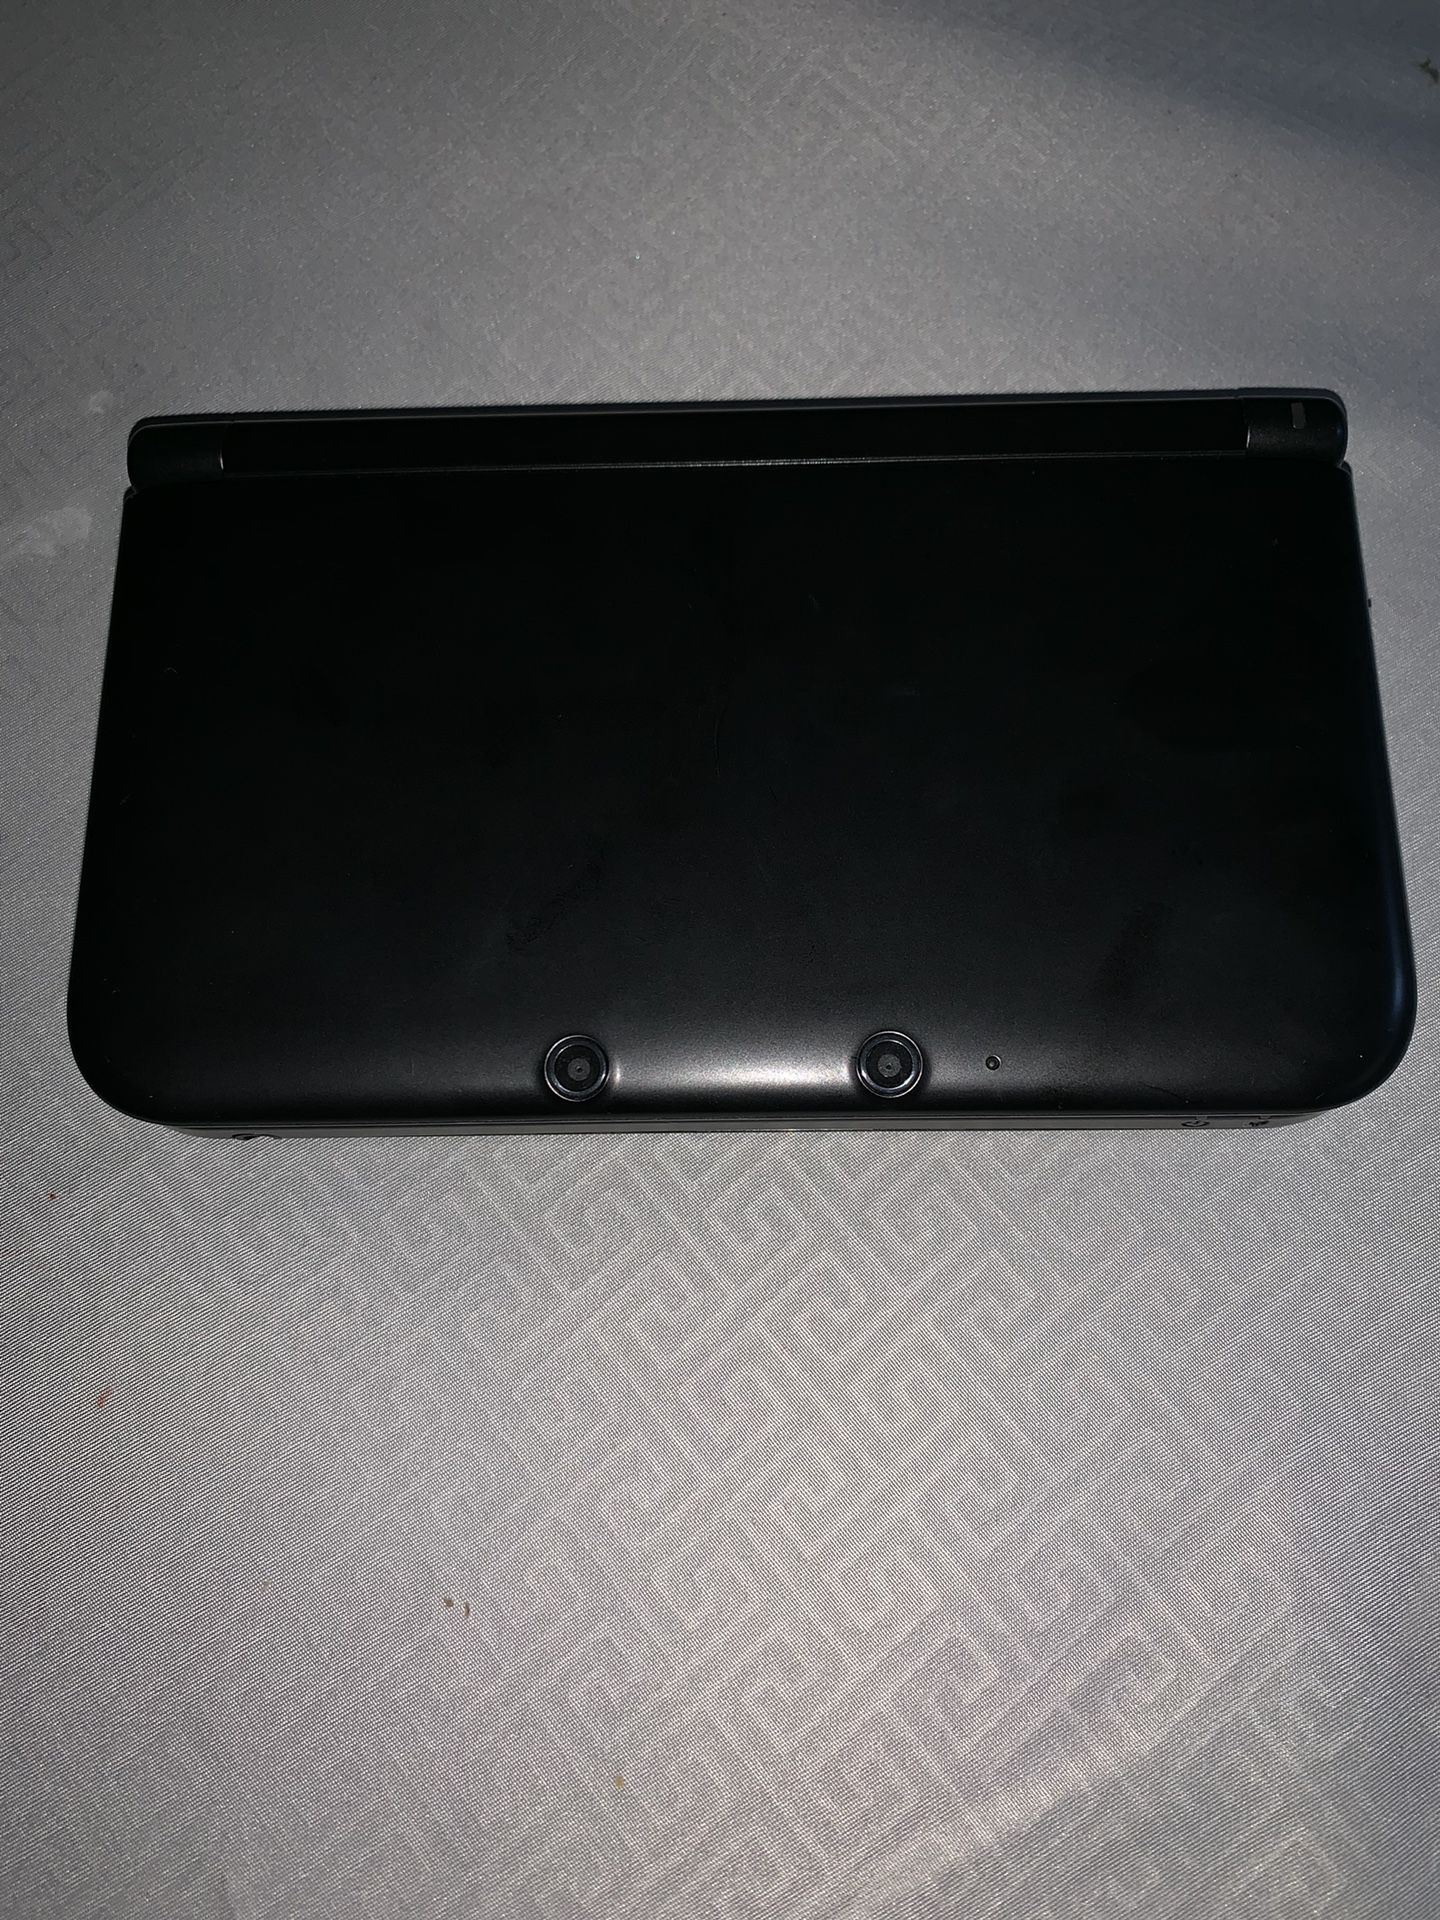 Nintendo 3Ds XL with accessories